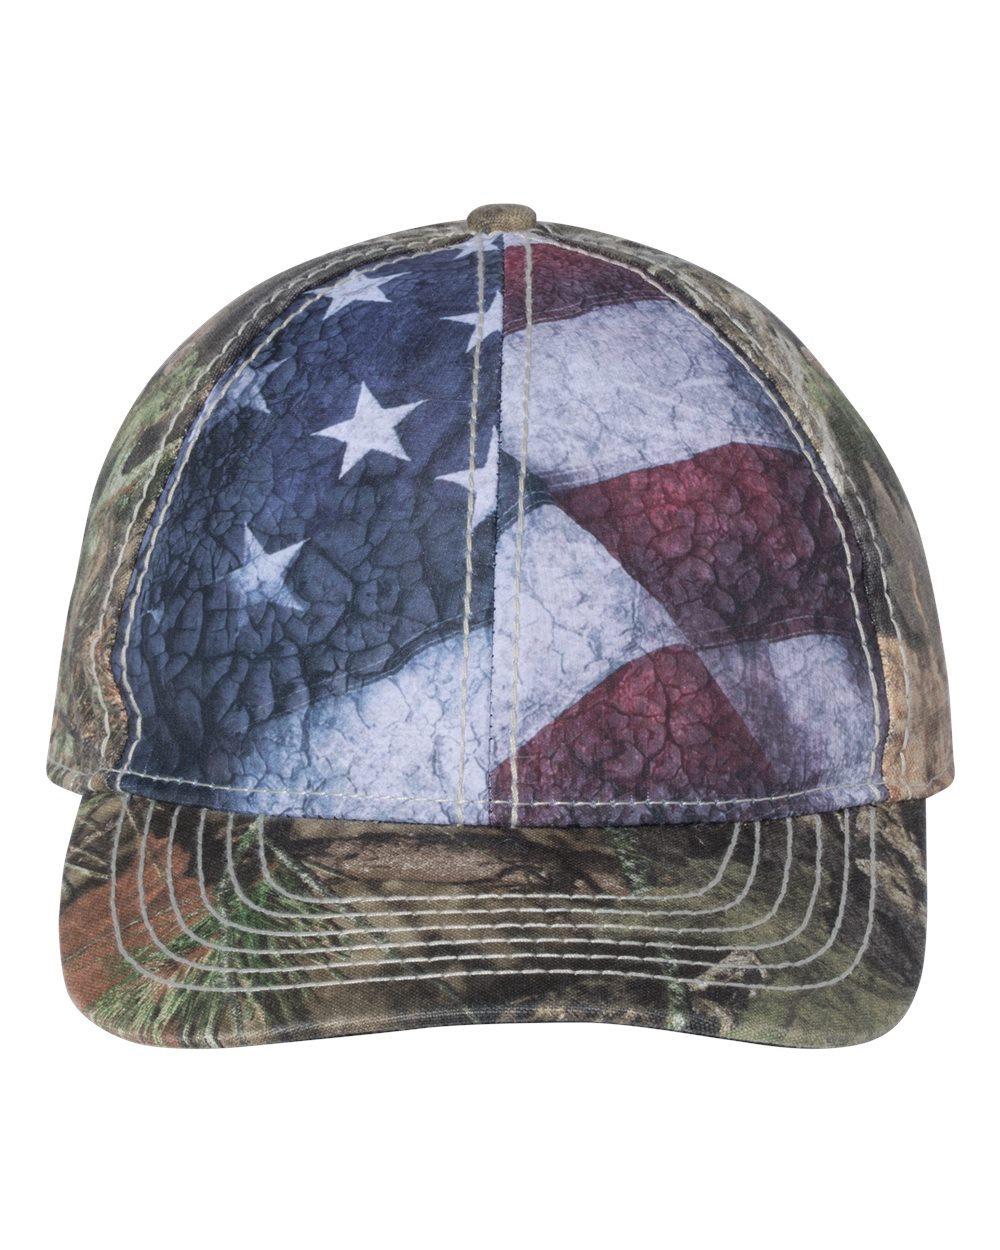 Camo with Flag Sublimated Front Panels Cap-Outdoor Cap